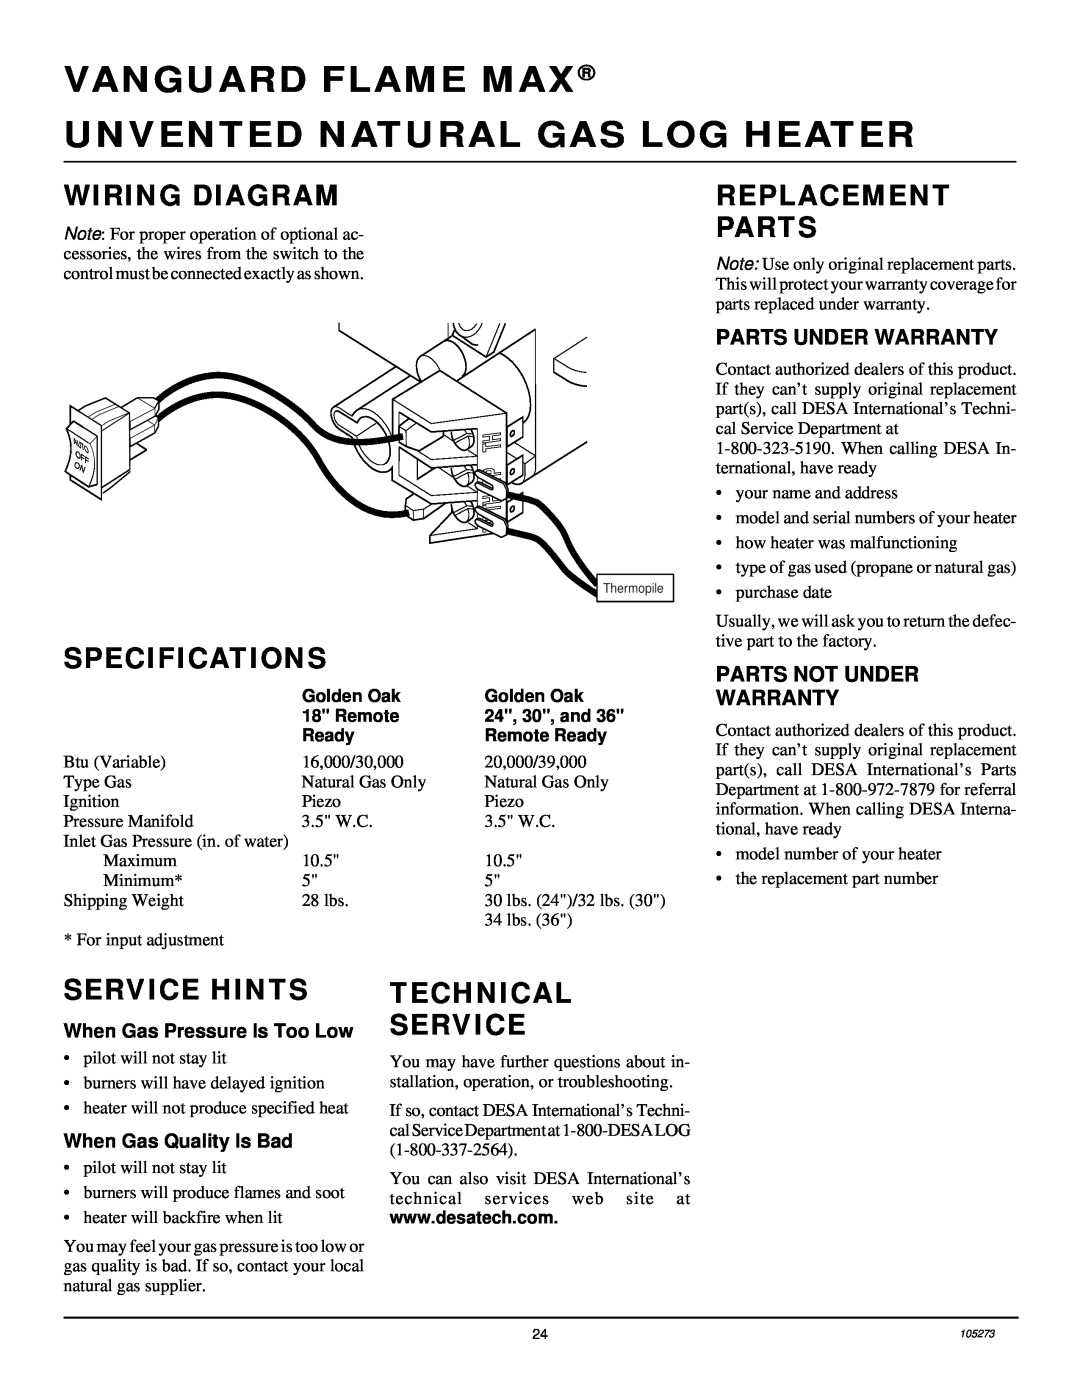 Vanguard Heating UNVENTED (VENT-FREE) NATURAL GAS LOG HEATER Wiring Diagram, Replacement Parts, Specifications 